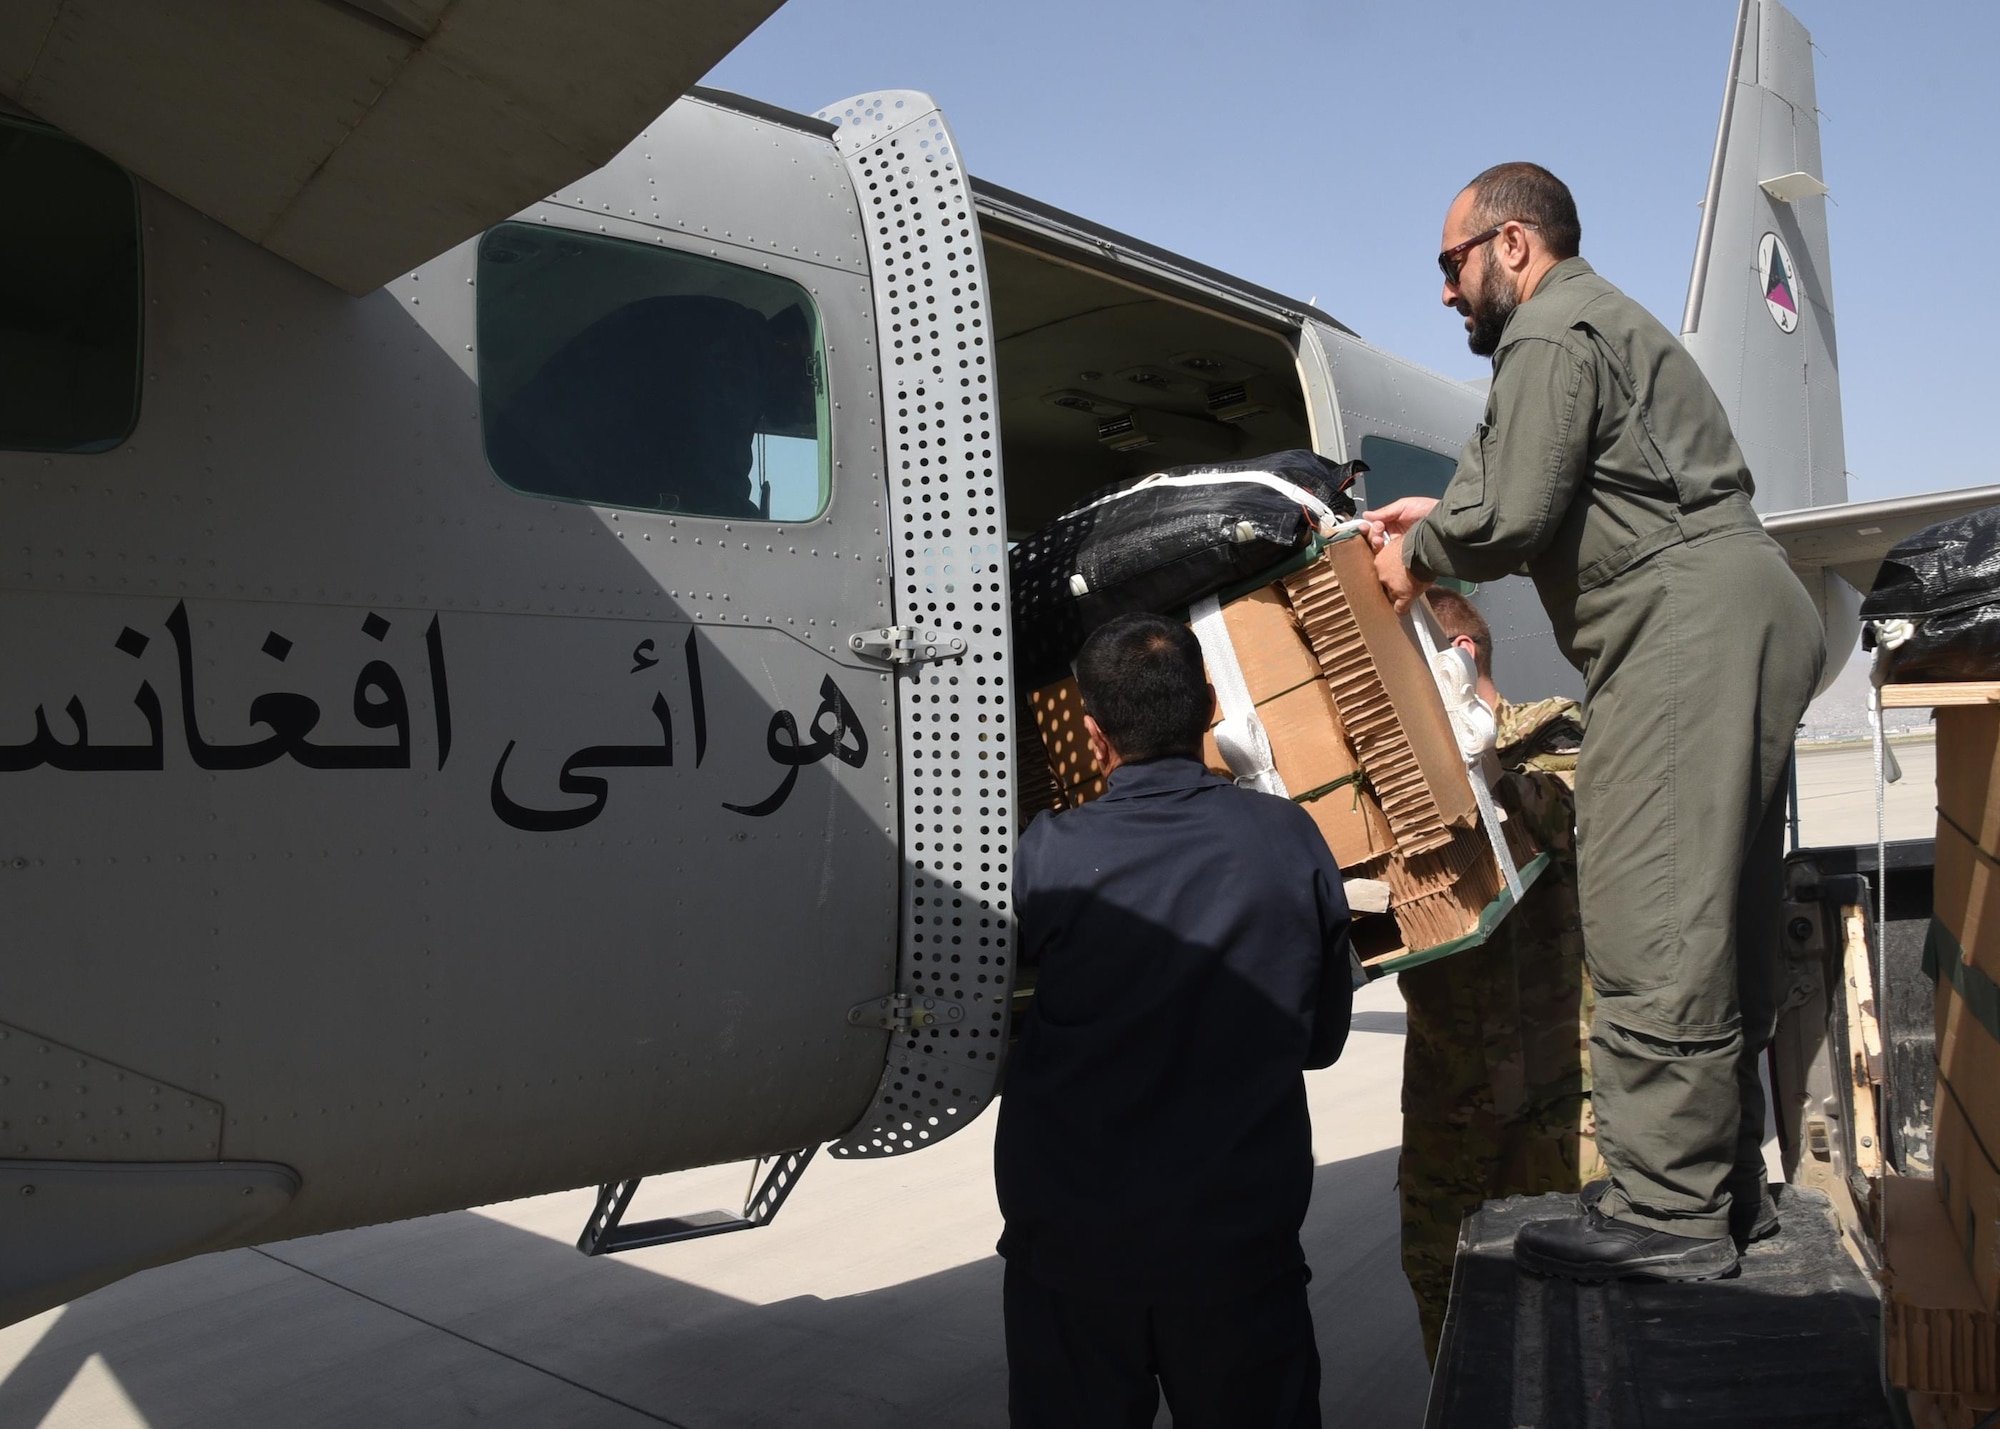 An Afghan Air Force C-208 crew loads a resupply pallet for delivery over Southeast, Afghanistan, on June 28, 2017. This was the first operational airdrop performed by AAF aircrew. The AAF successfully delivered 800 pounds of supplies to Afghan Border Police at their coordinated drop zone. (U.S. Air Force photo by Tech. Sgt. Veronica Pierce)